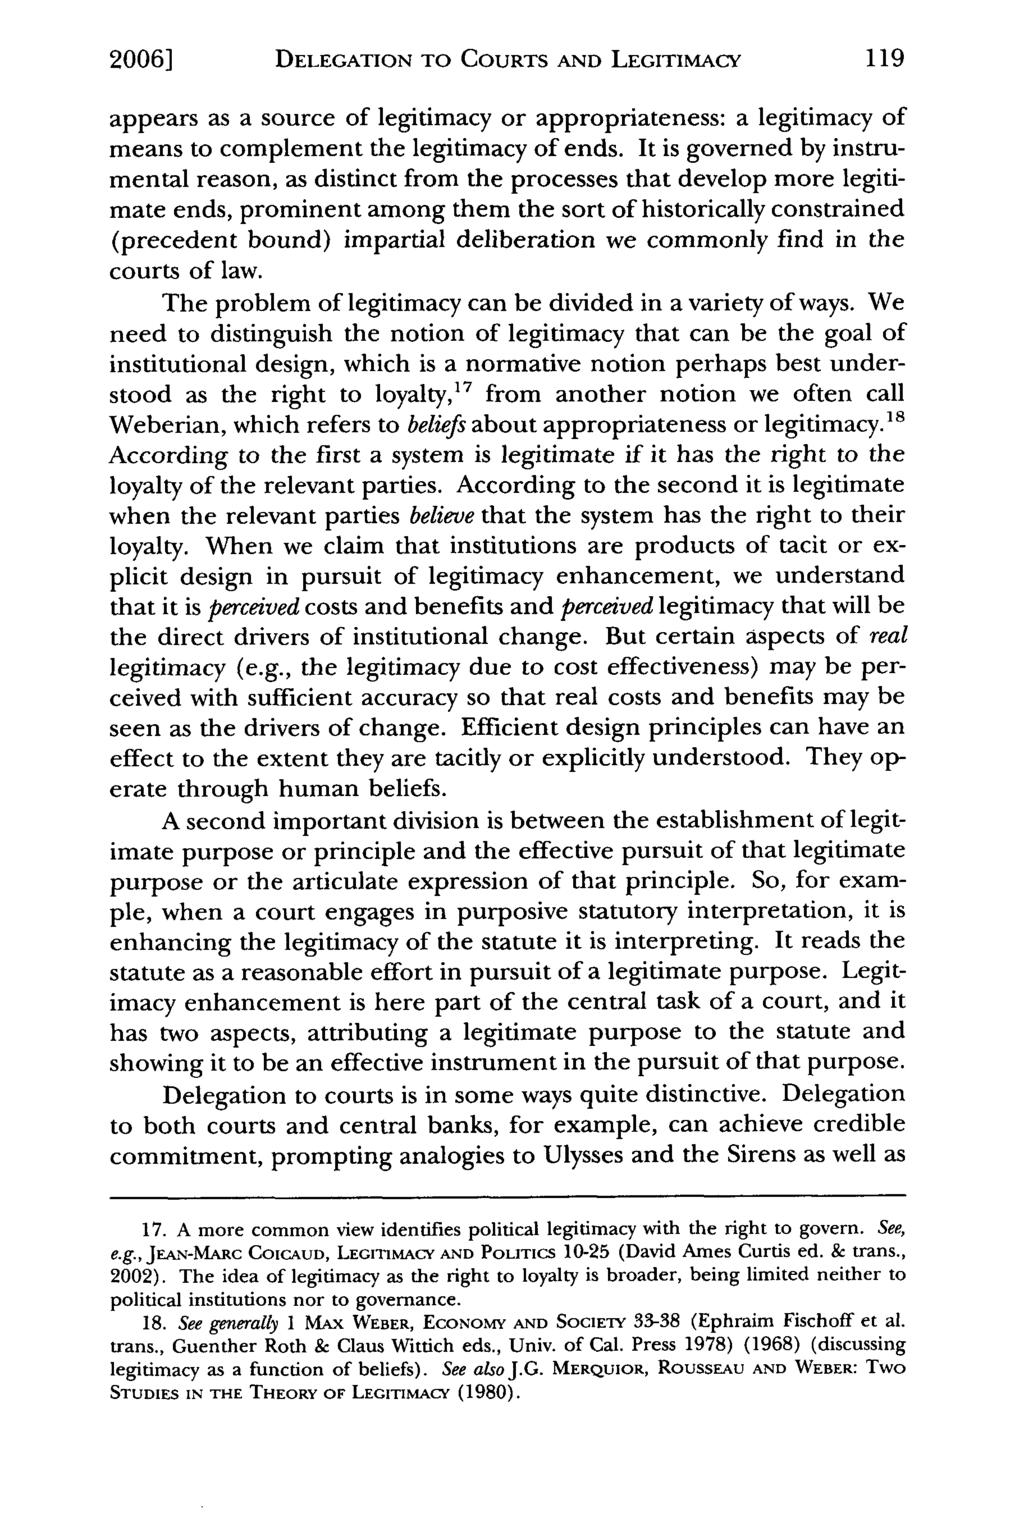 20061 DELEGATION TO COURTS AND LEGITIMACY appears as a source of legitimacy or appropriateness: a legitimacy of means to complement the legitimacy of ends.